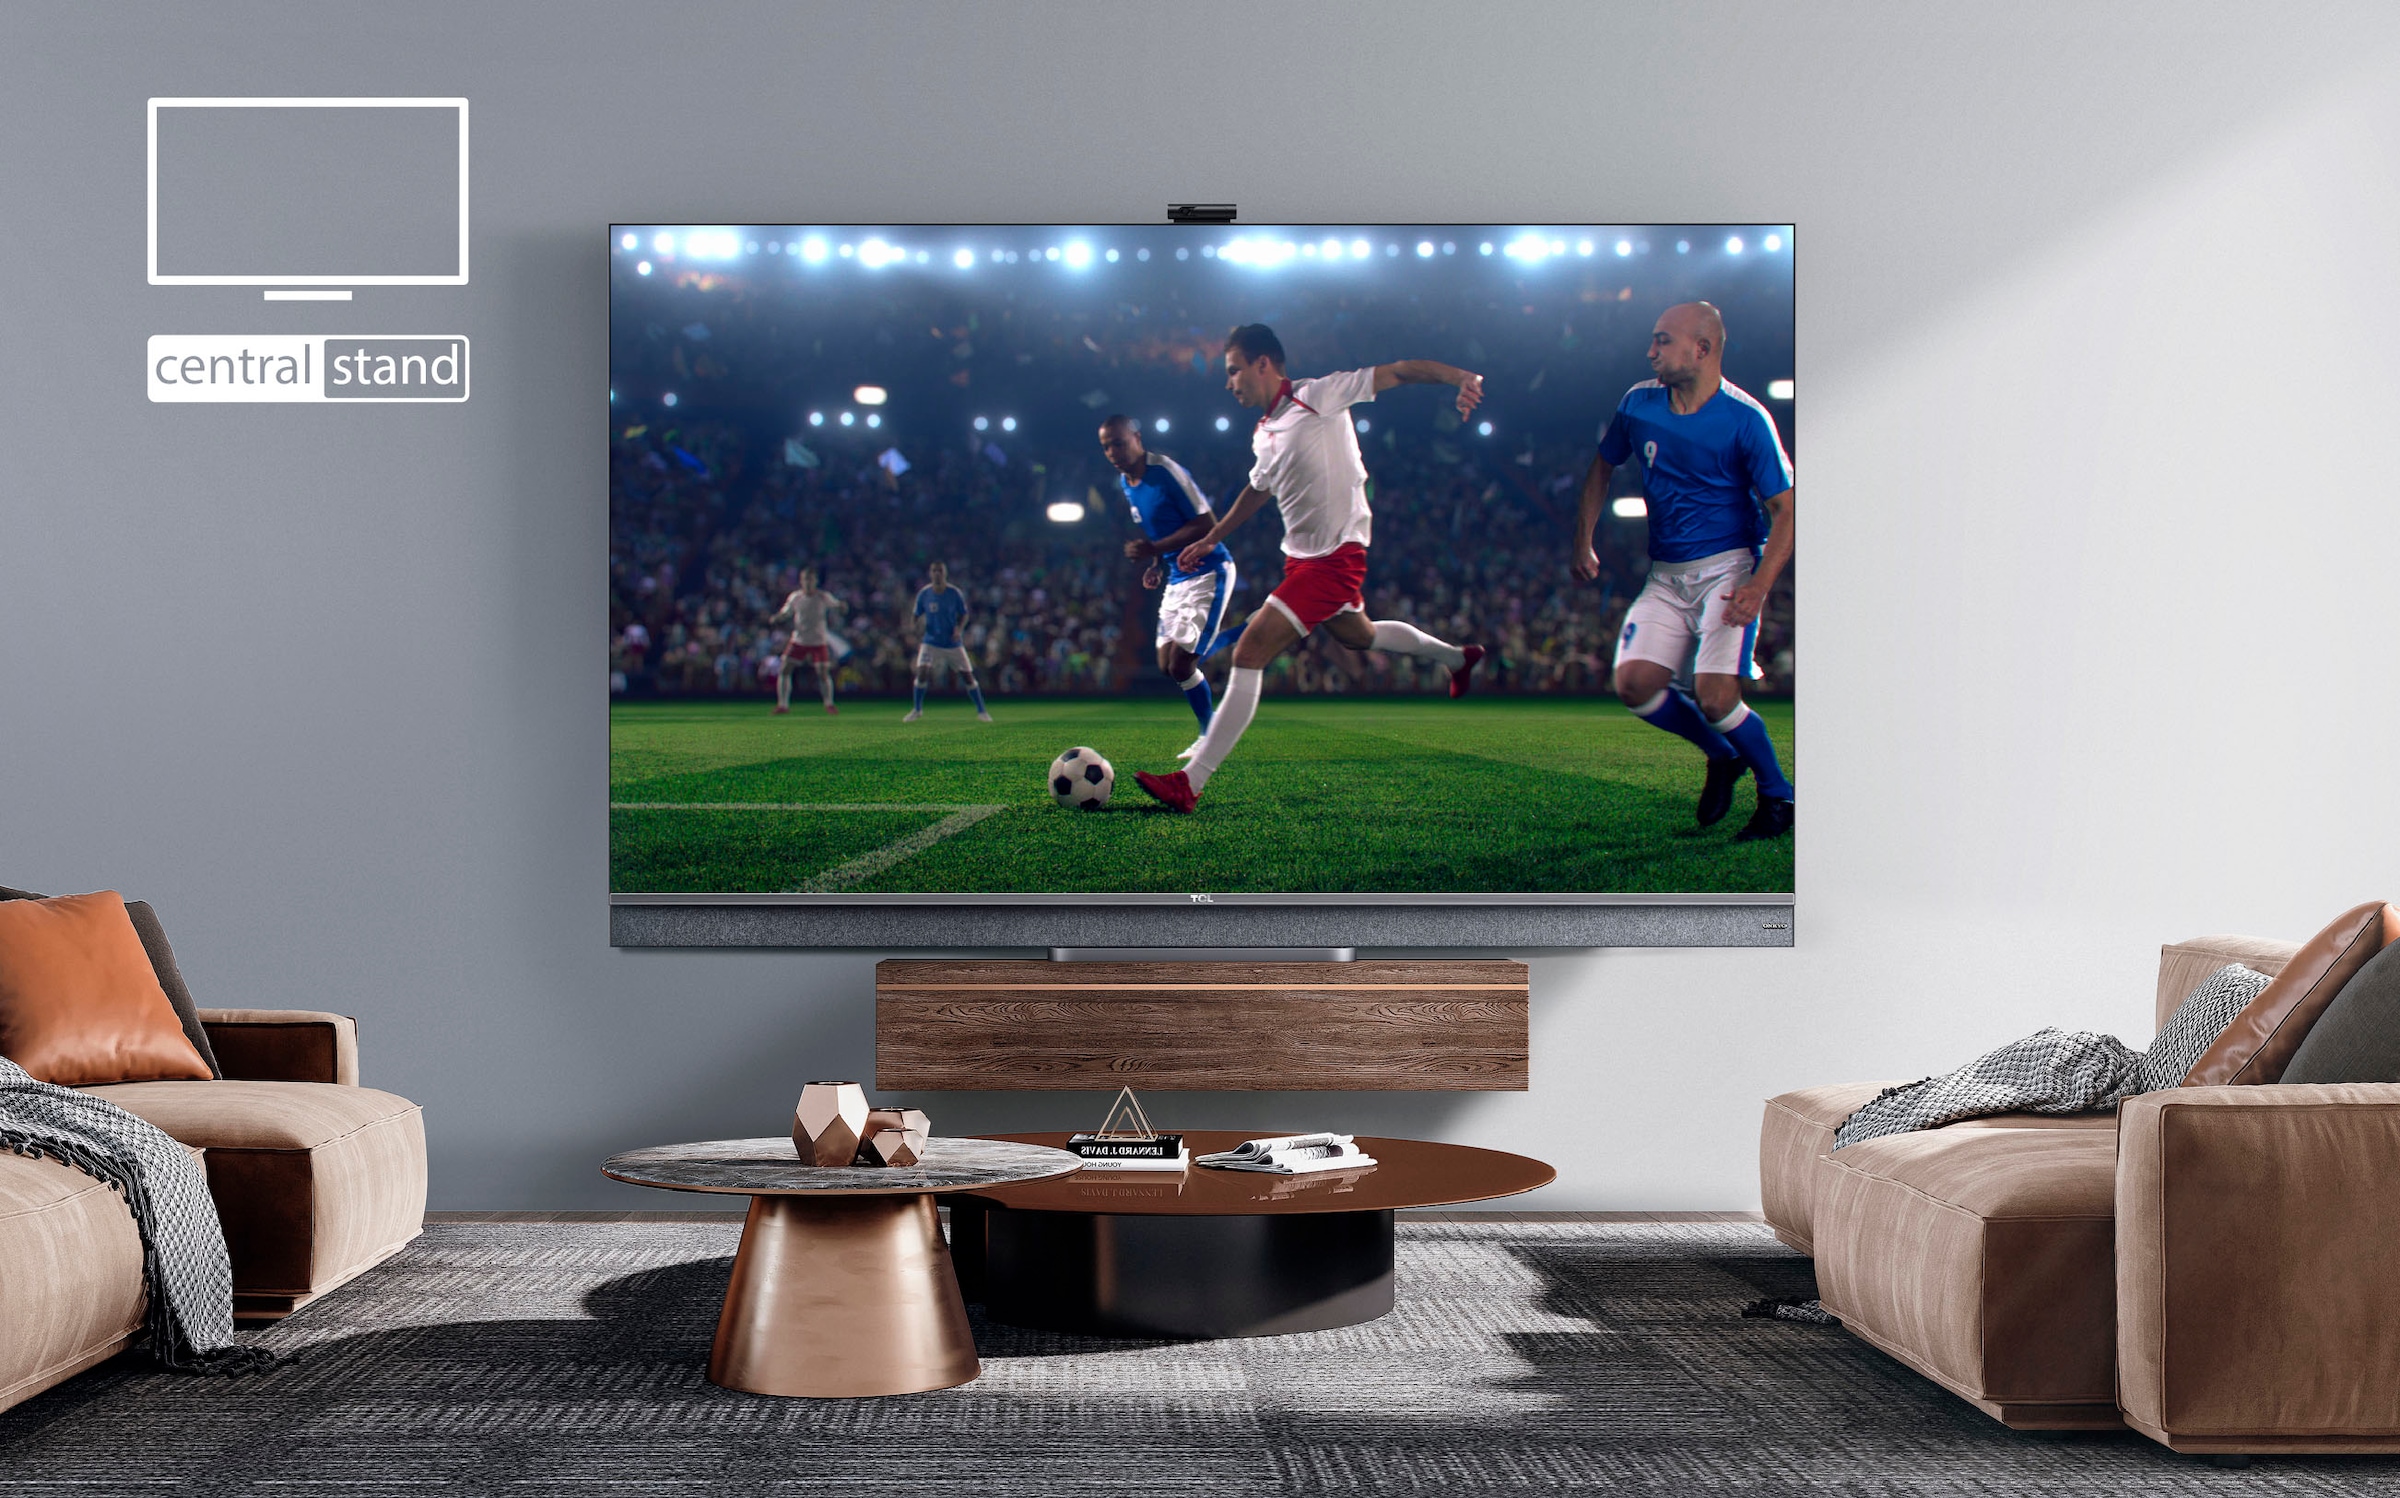 TCL QLED Mini LED-Fernseher »65C825X1«, 164 cm/65 Zoll, 4K Ultra HD, Android TV-Smart-TV, Android 11, Onkyo-Soundsystem